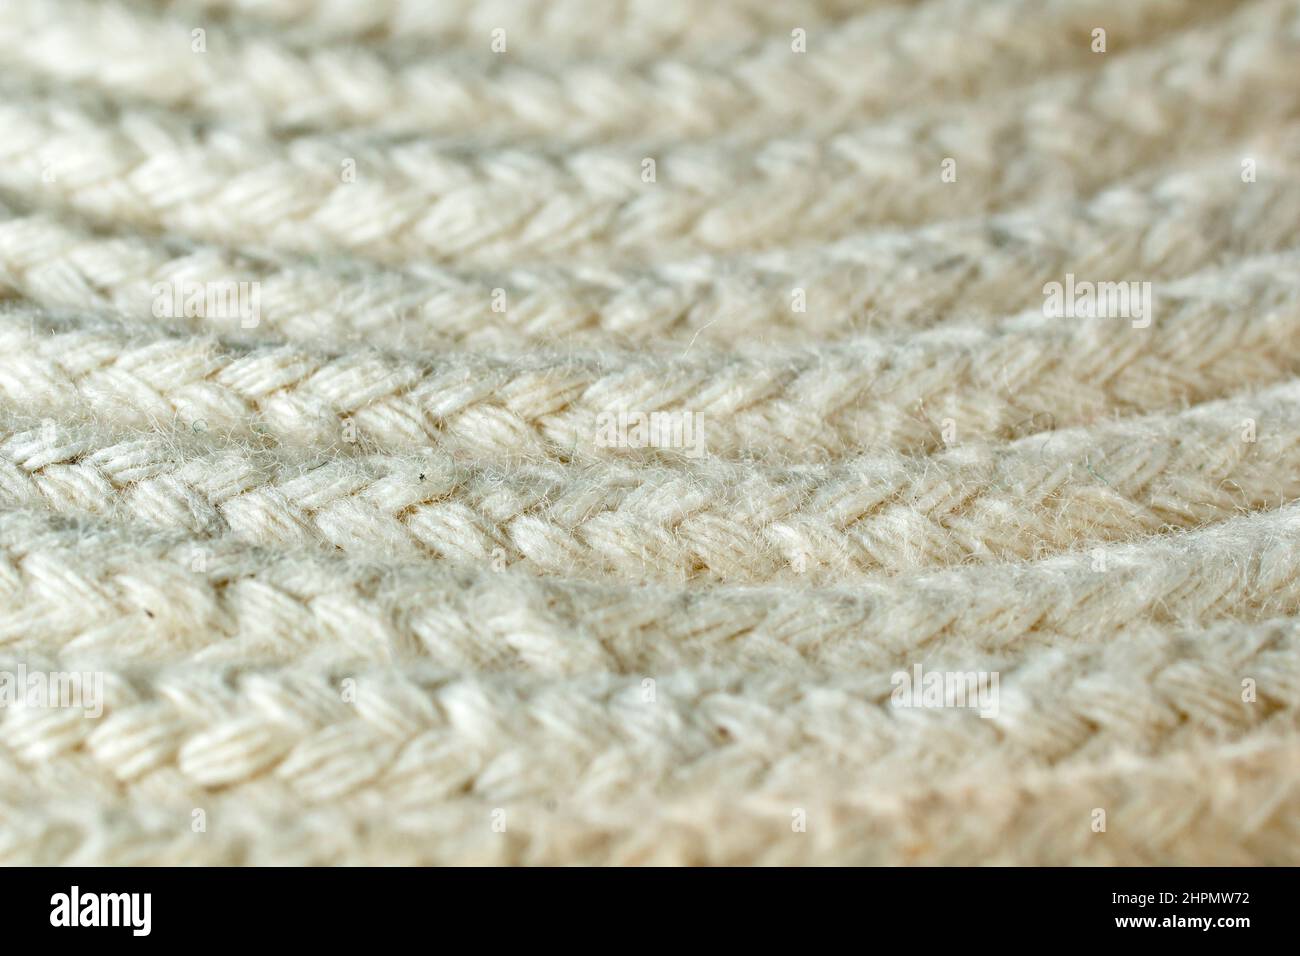 Close up detail of the pattern produced by coiling a thin white braided cotton rope. Stock Photo